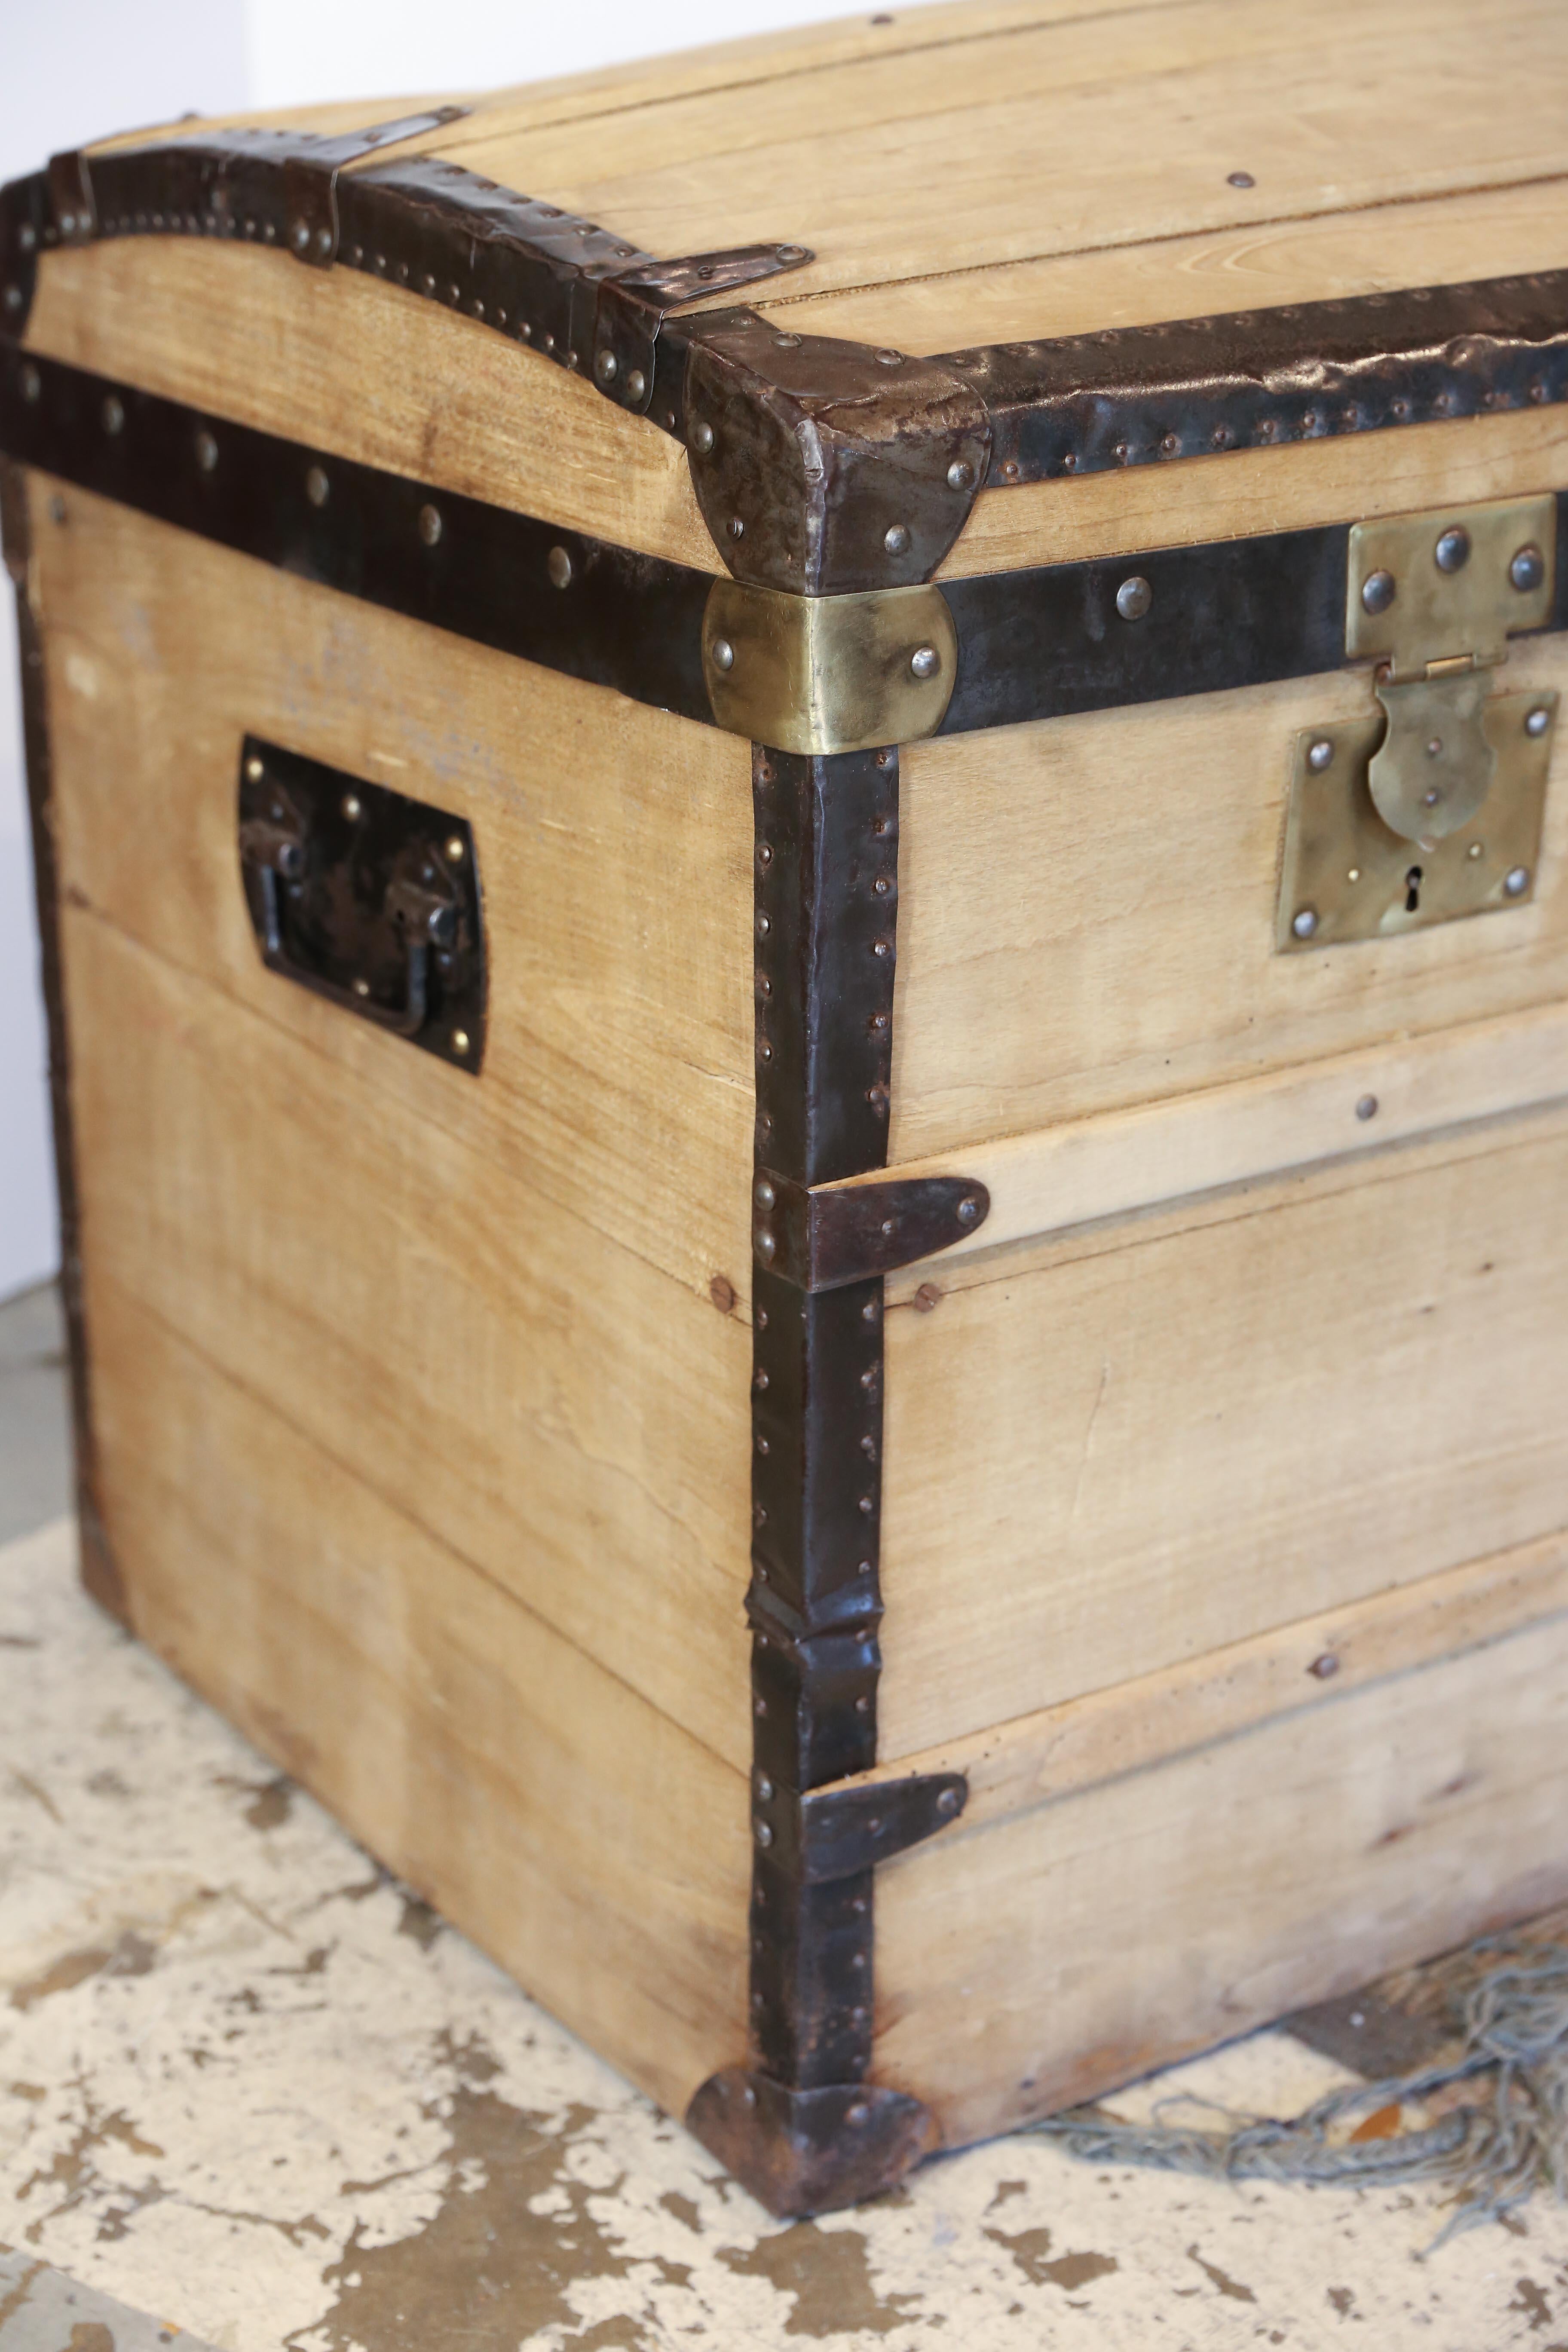 A fantastic, antique wood and iron dome-top trunk perfect for storing all manner of items-- blankets, throw pillows, etc. This piece has been stripped of its original finish, which really highlights the iron frame and brass locks. Handles at the